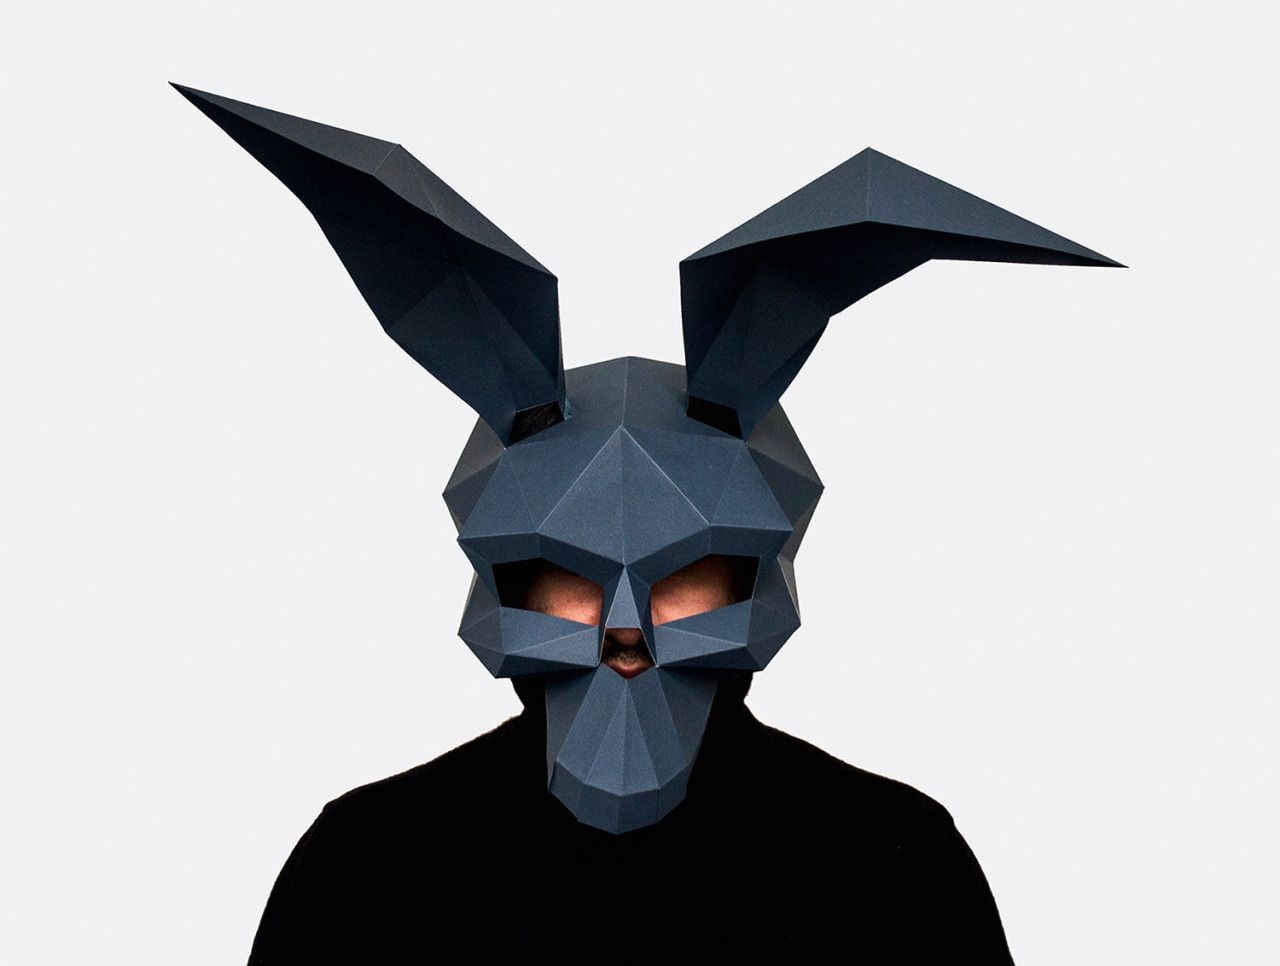 Papercraft Batman Mask Diy Paper Polygonal Masks You Can Make In Time for Halloween